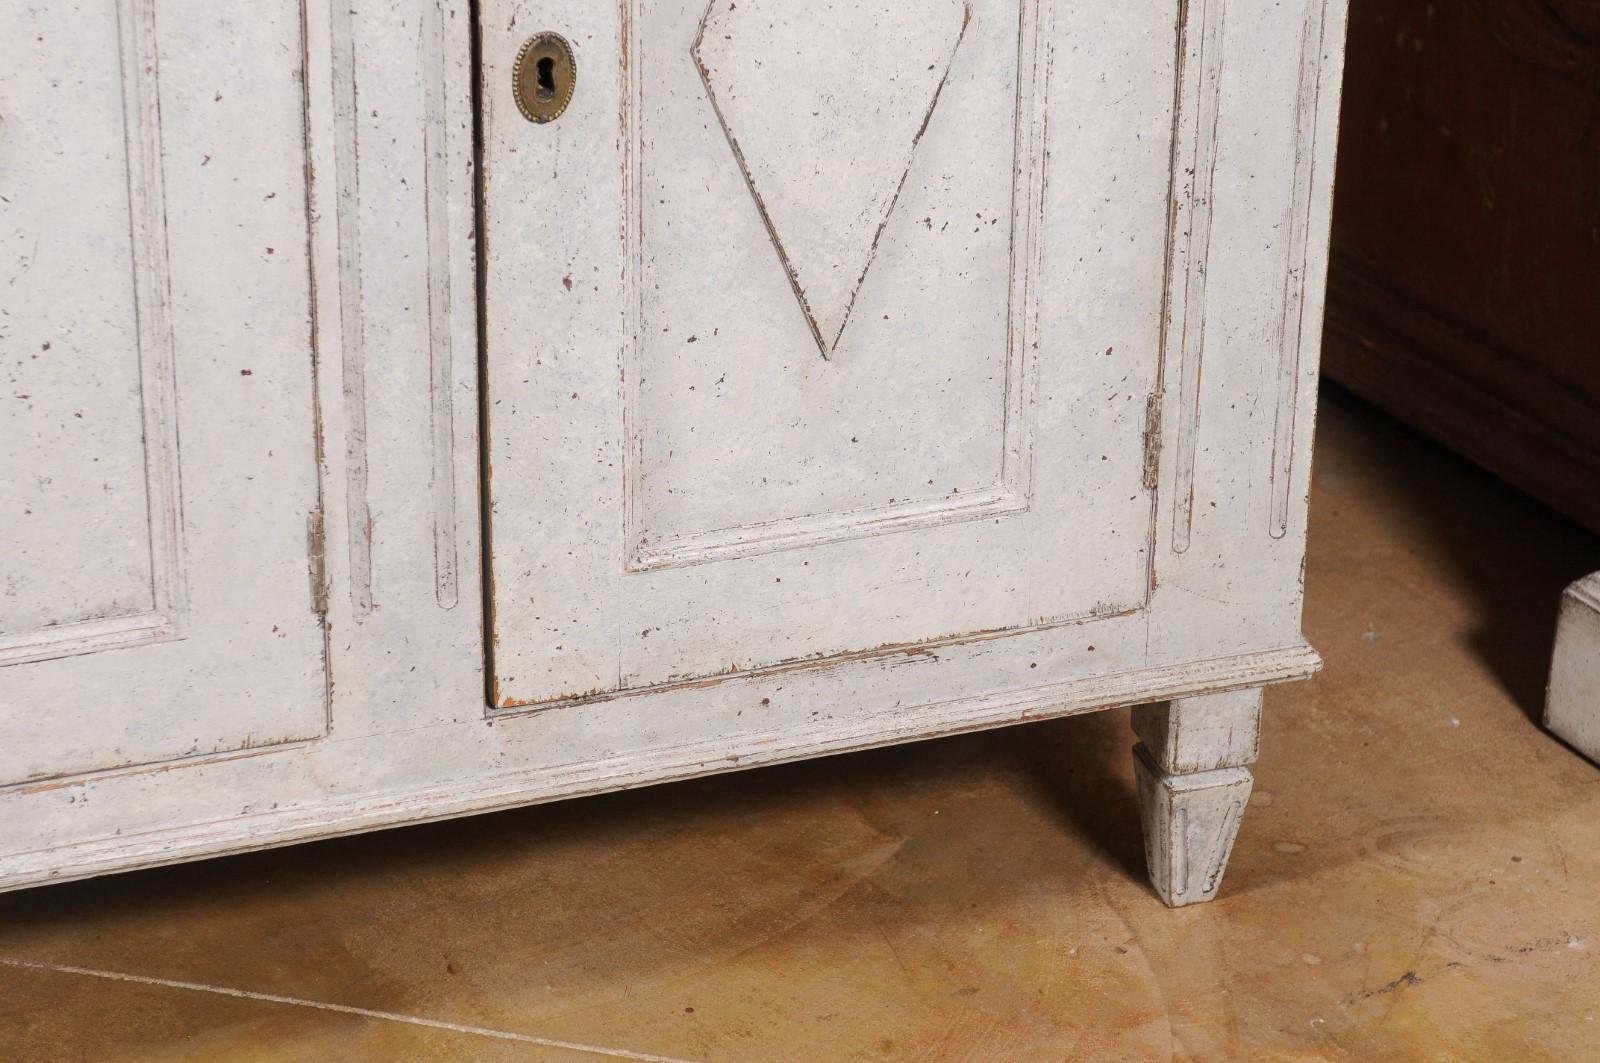 A Swedish Gustavian style painted wood sideboard from the late 19th century, with three doors and diamond motifs. Created in Sweden during the last decade of the 19th century, this painted sideboard features a rectangular top sitting above three